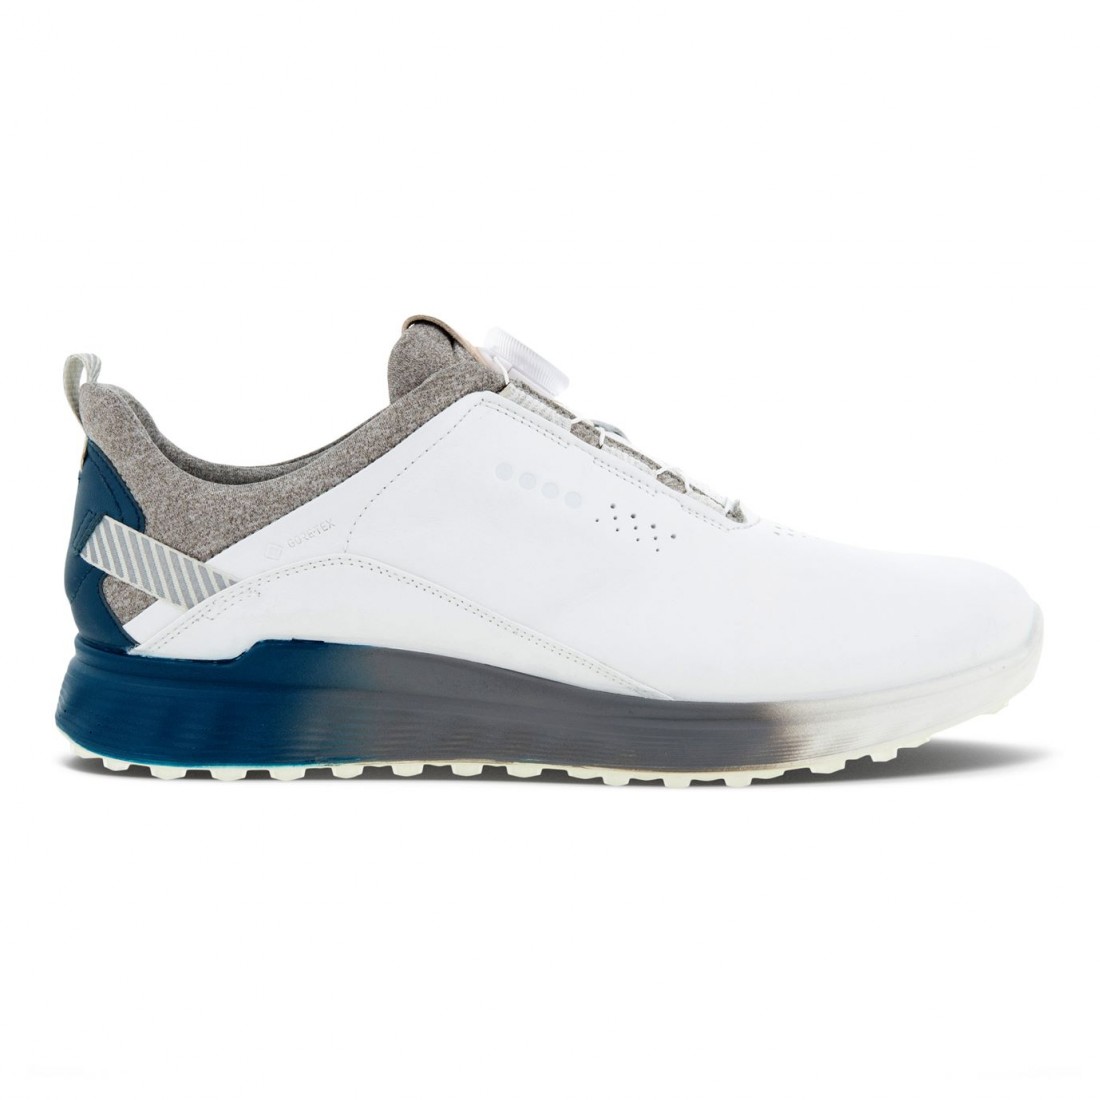 ECCO - Vente chaussures golf homme modèle S-THREE BOA blanches